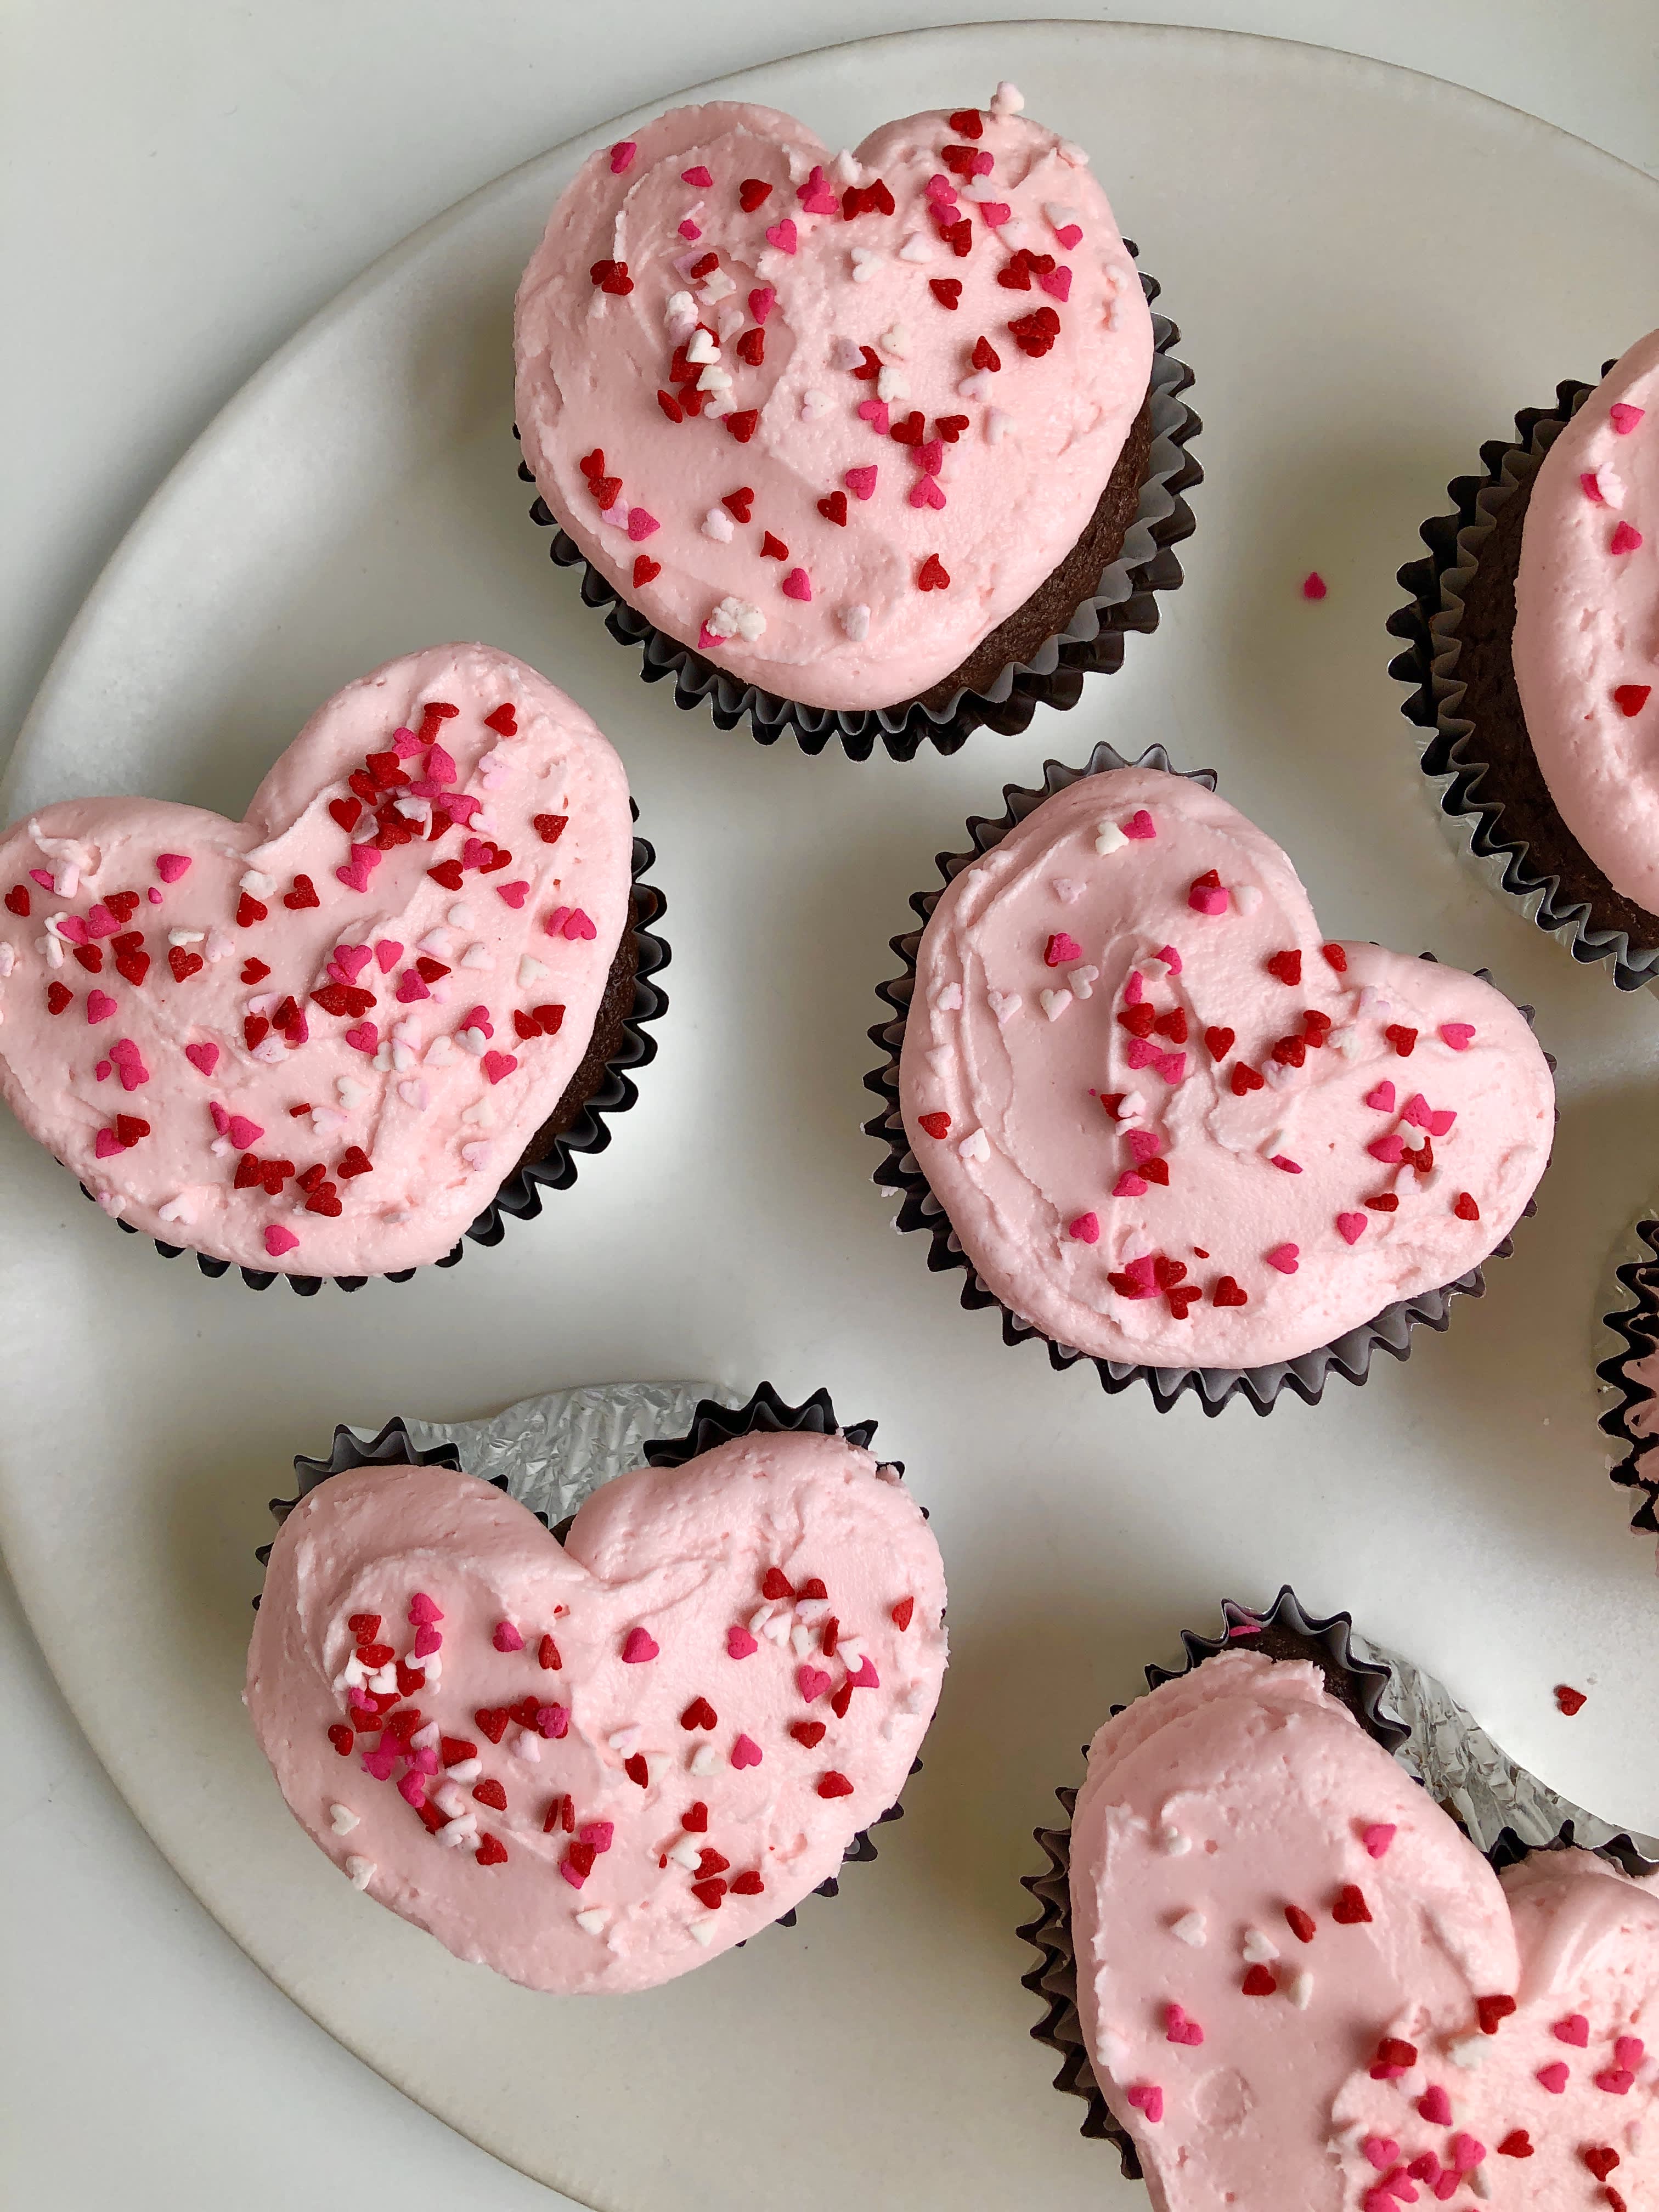 The Ingenious Hack for Making Heart-Shaped Cupcakes | Kitchn